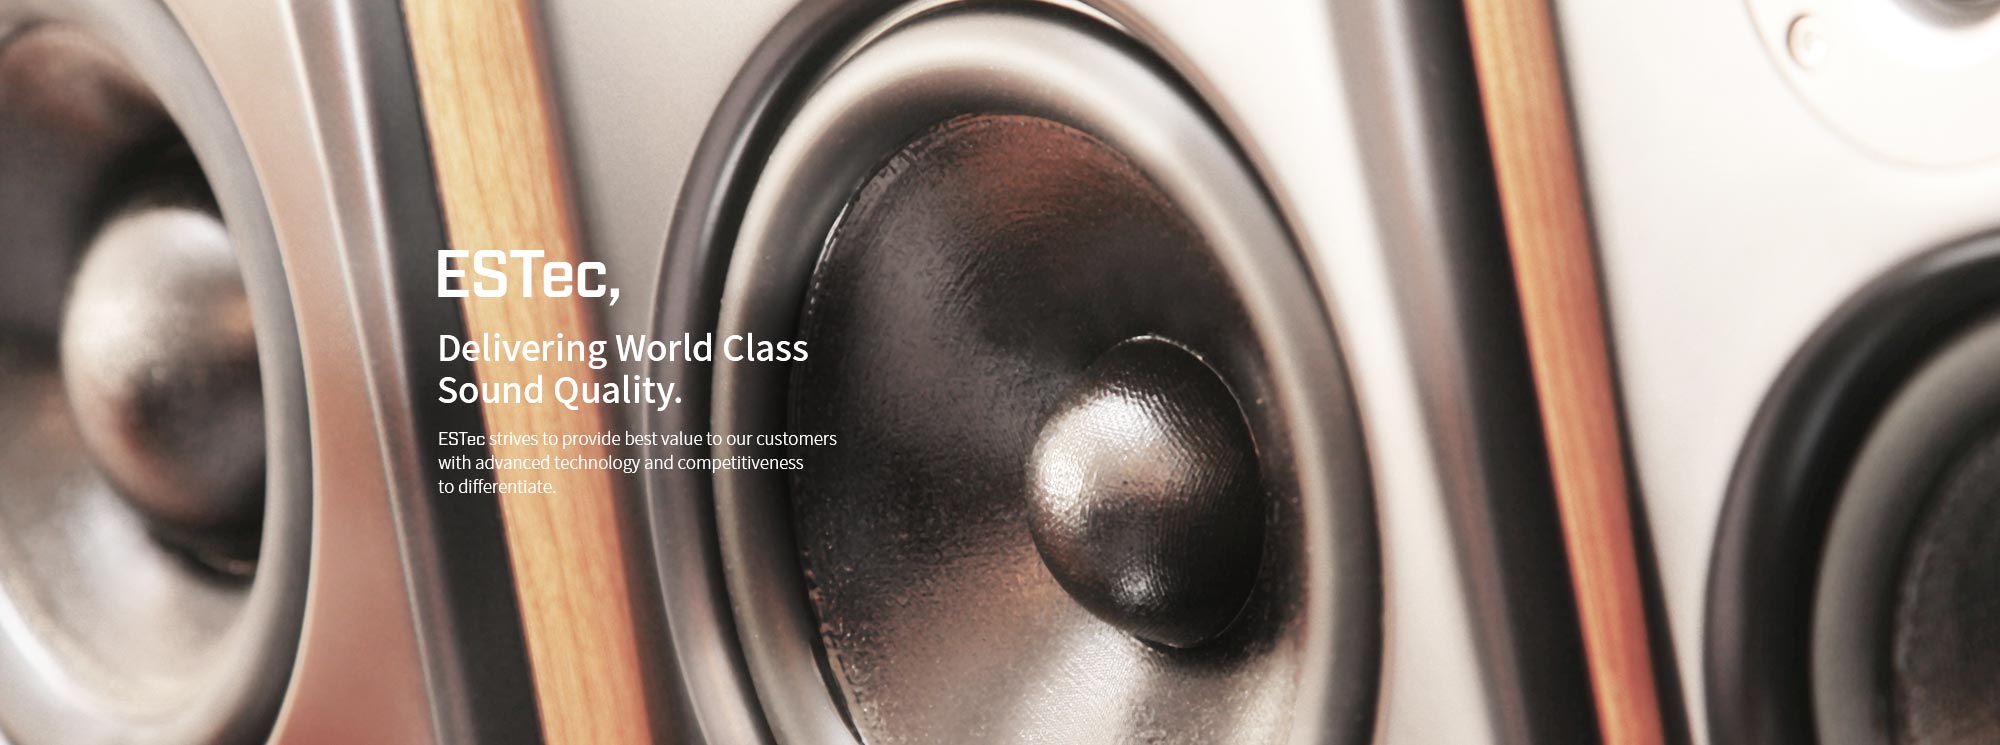 estec,Delivering World Class Sound Quality. estec strives to provide best value to our customers  with advanced technology and competitiveness to differetiate.